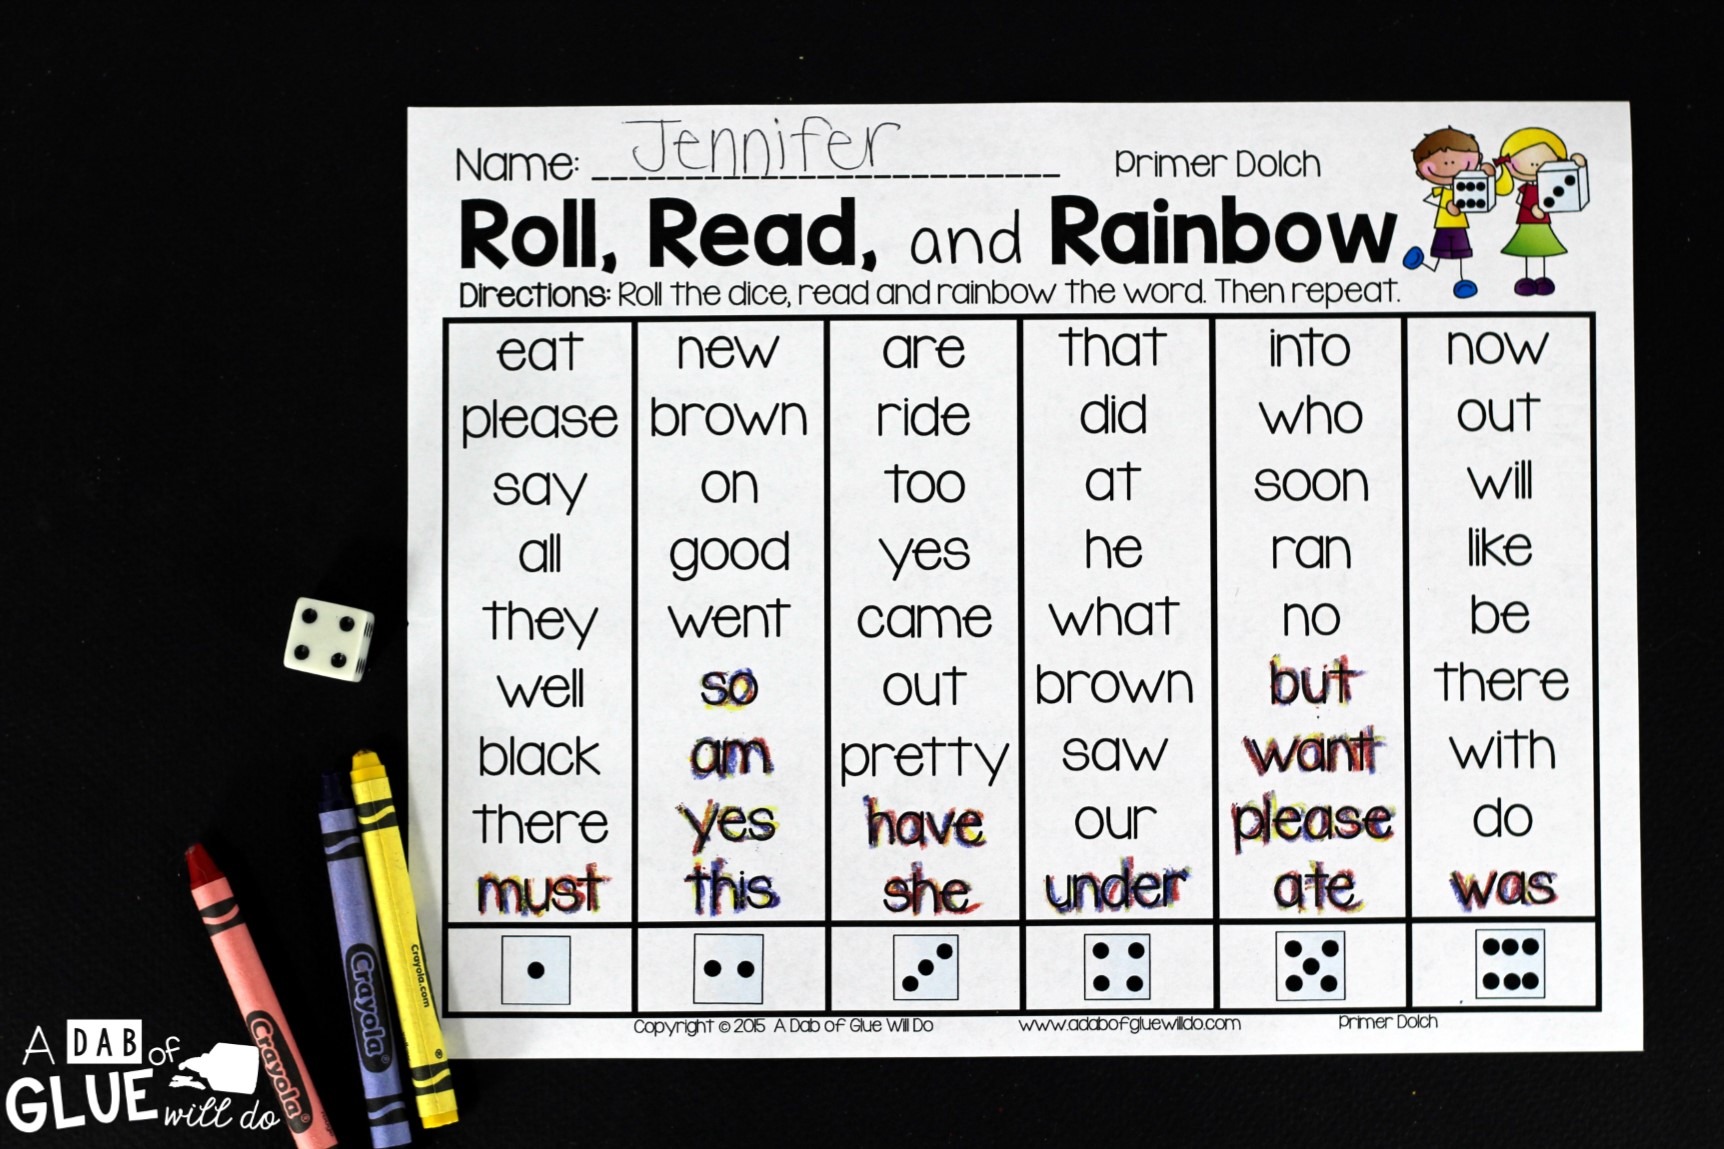 Engage your class in Dolch Primer {Brights} sight word activities, literacy centers, and word wall! This unit is perfect for literacy centers in Kindergarten, First Grade, and Second Grade classrooms and packed full of inviting student activities. Students will learn using their favorite alphabet games, Play Doh word mats, Tic-Tac-Toe, and more! This pack is great for homeschoolers with a student assessment included!